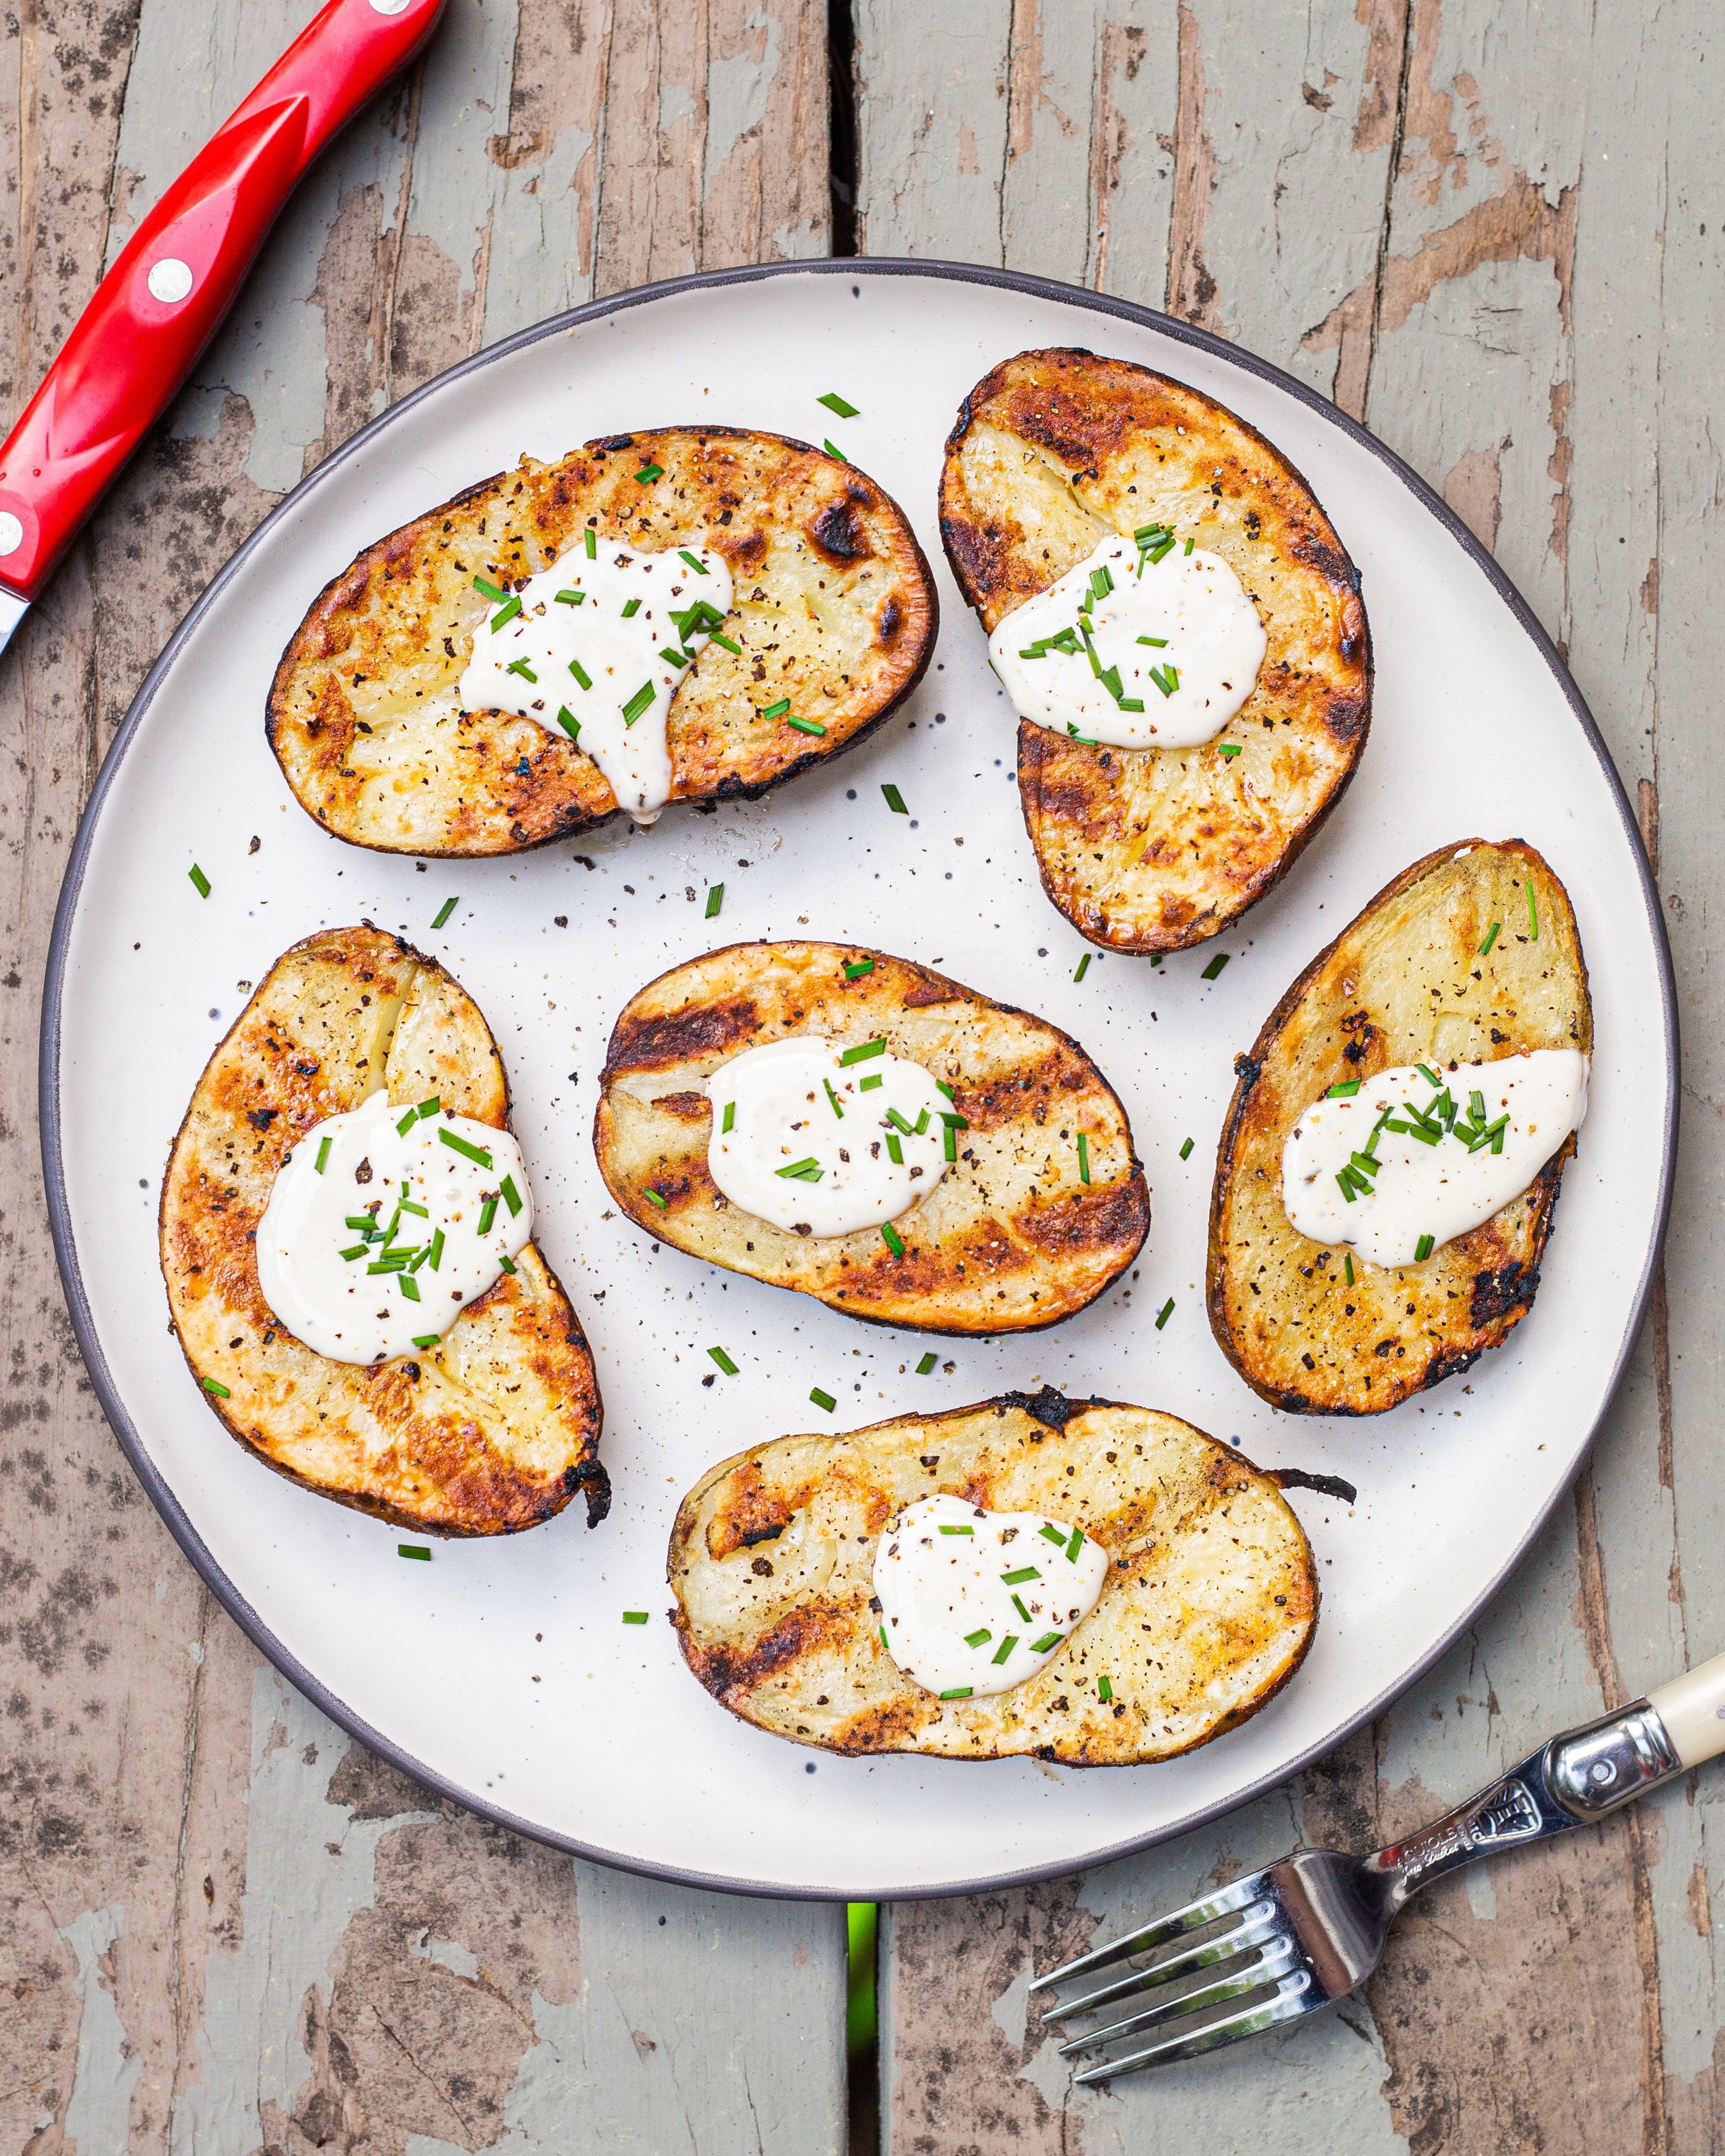 Grilled potatoes with ranch and chives